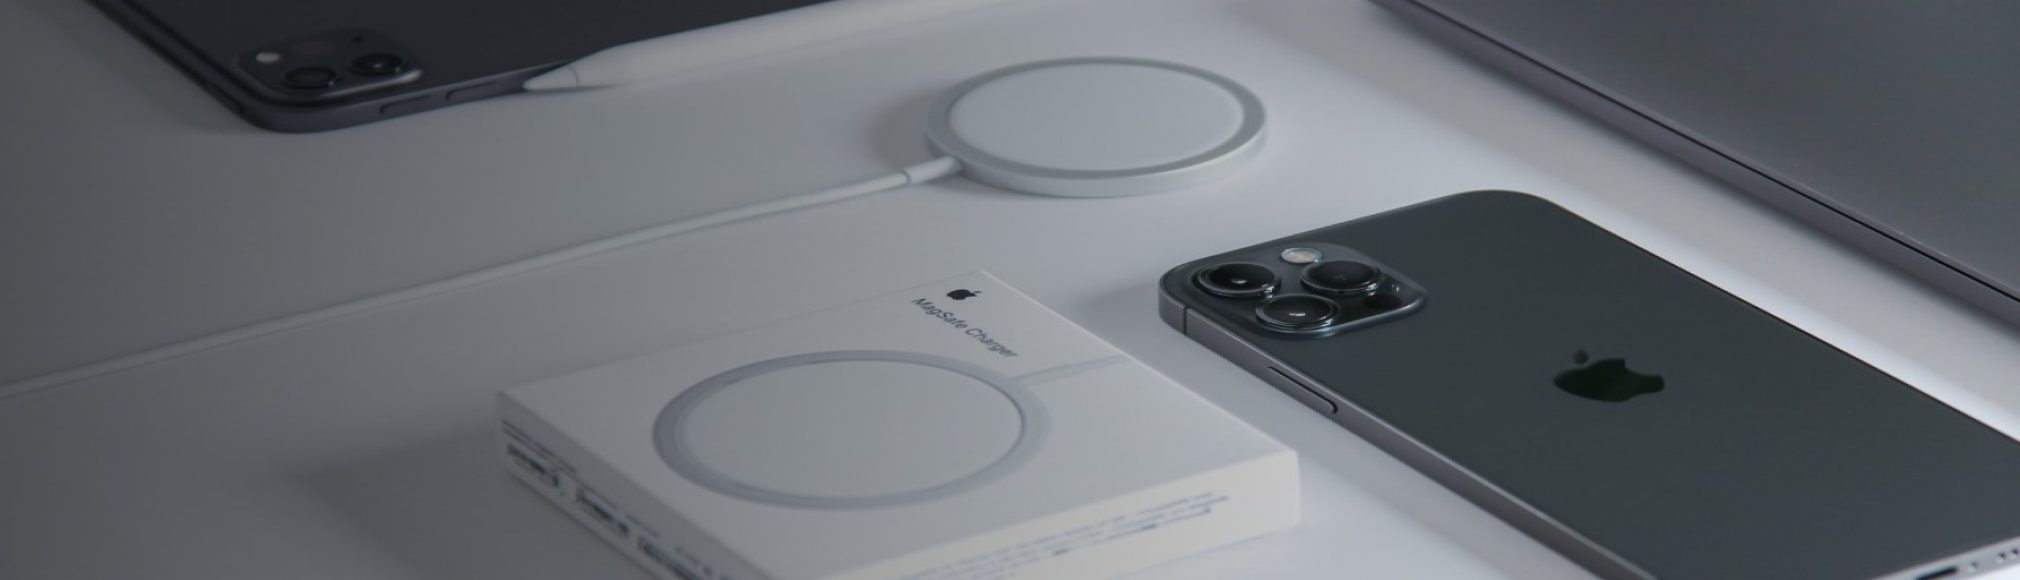 Apple launches new iPhone accessories, including MagSafe cases and